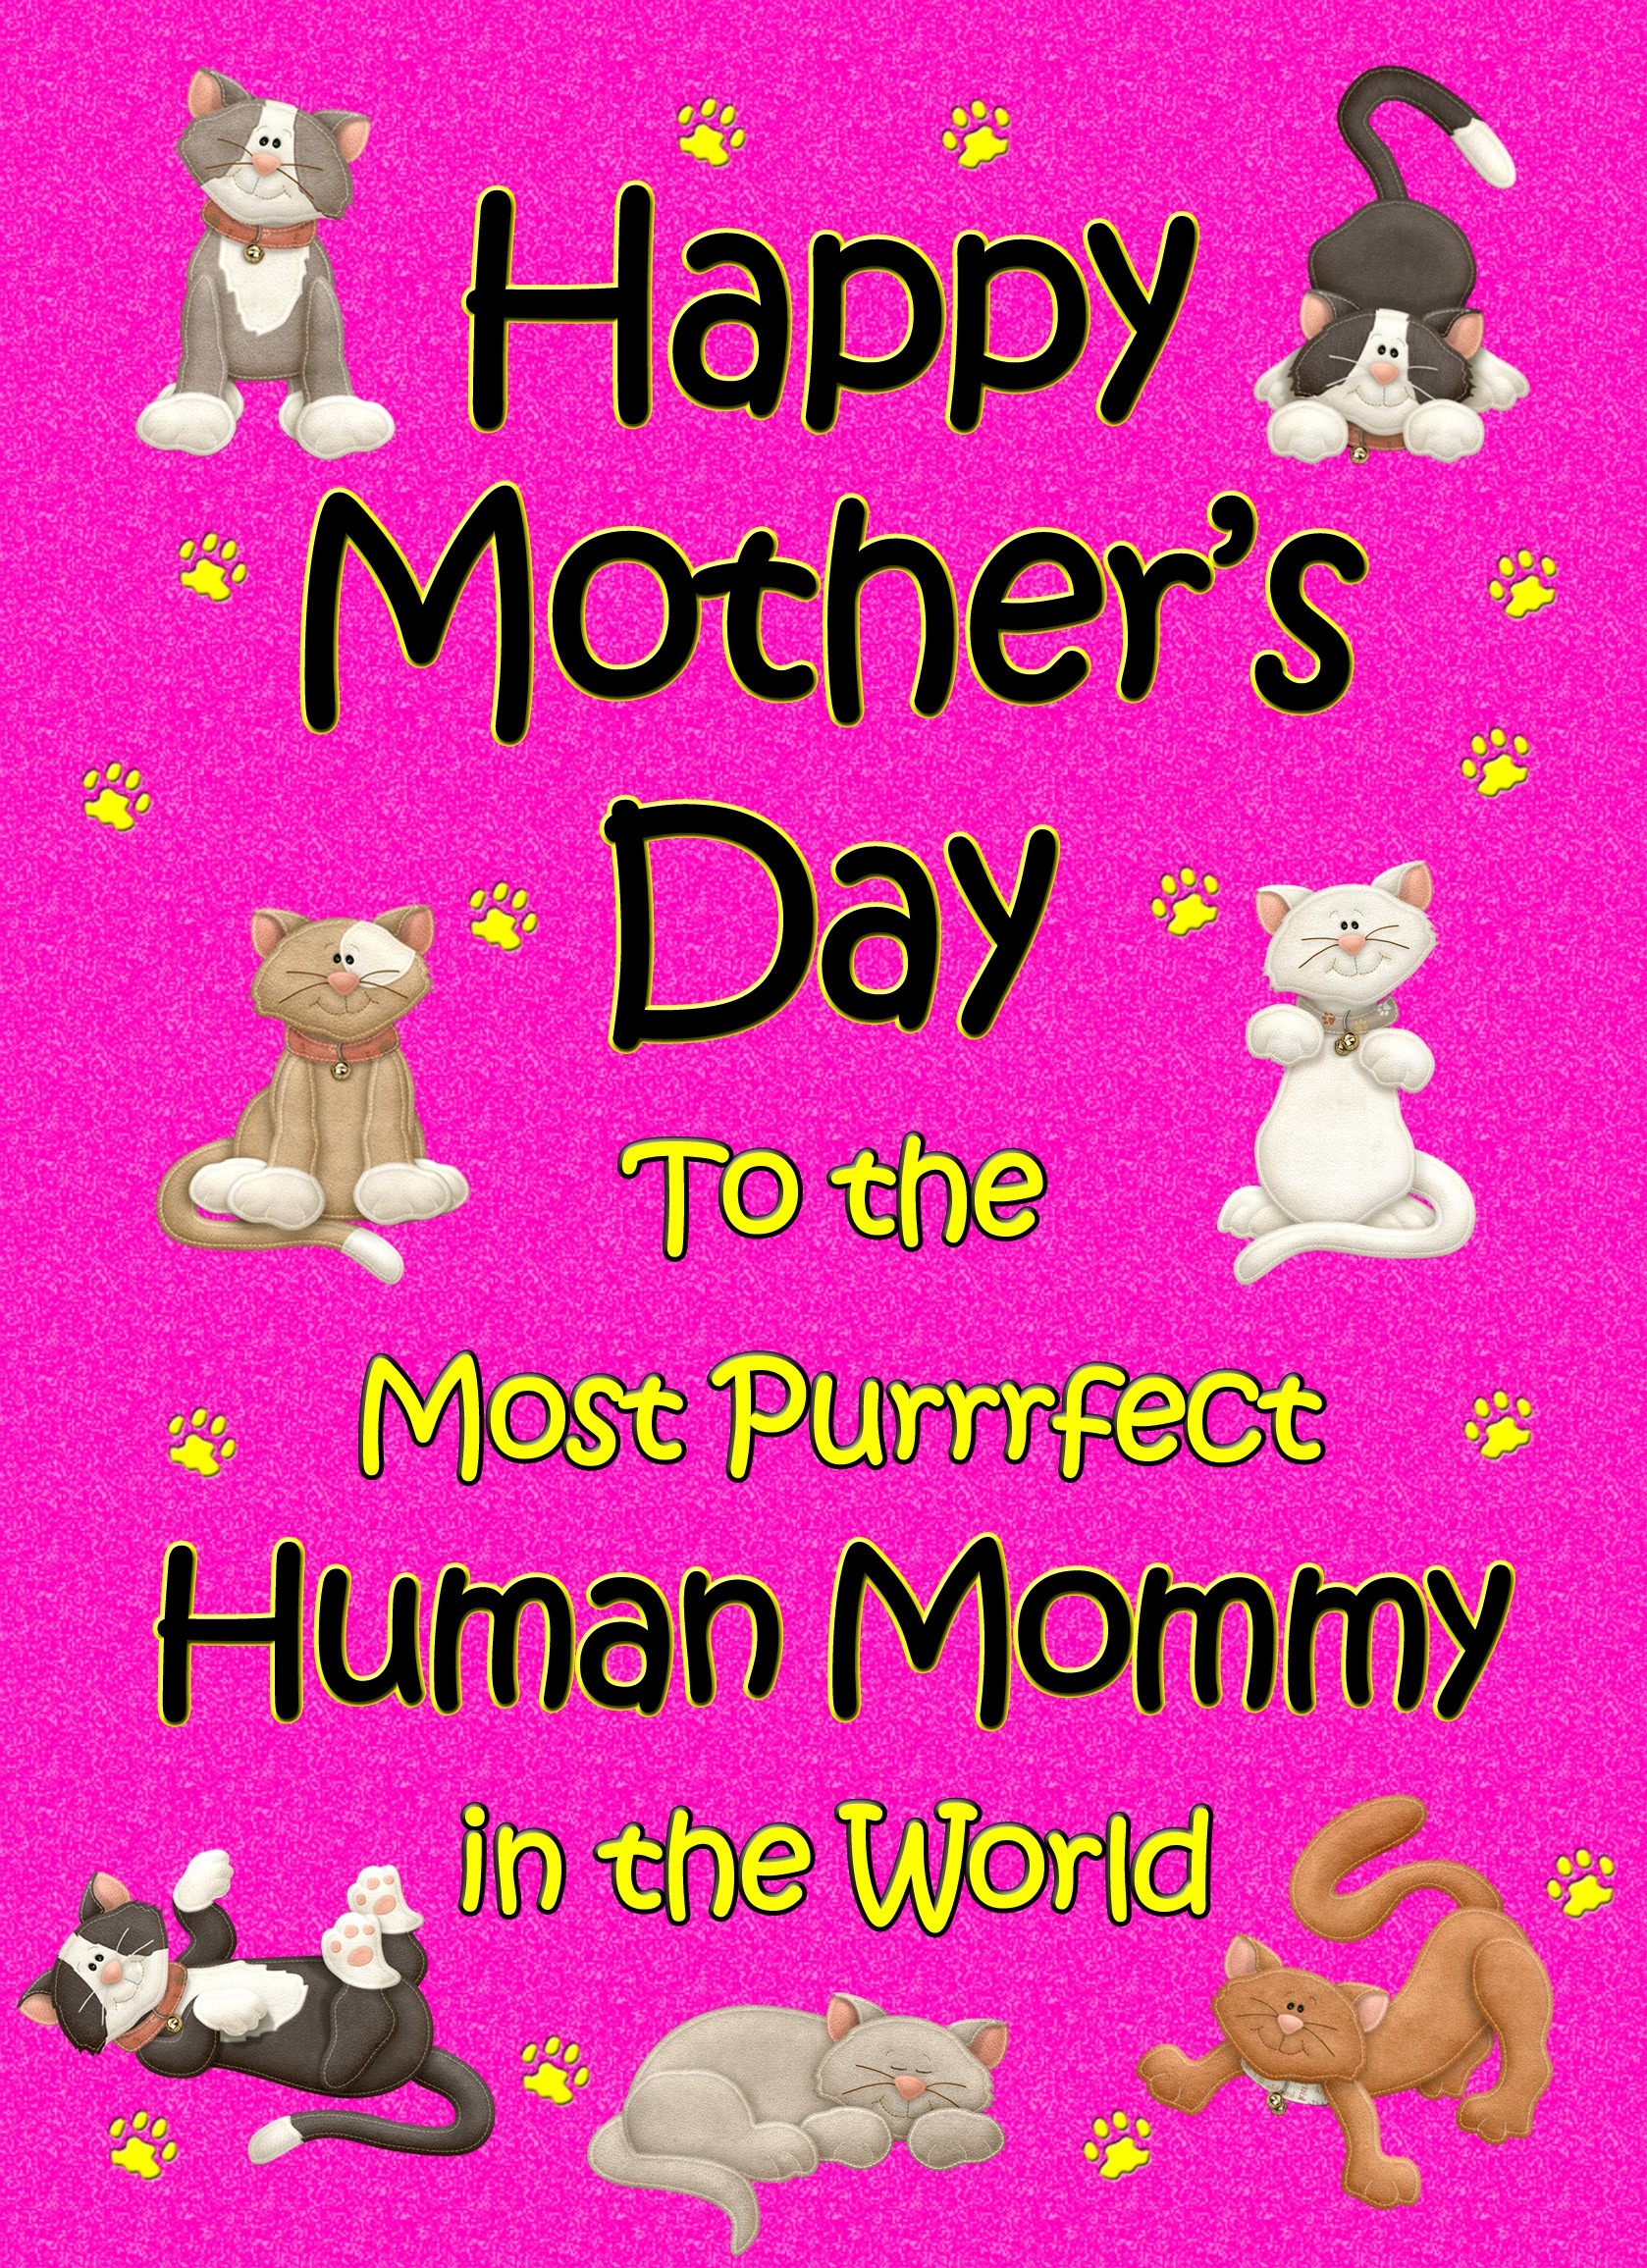 From The Cat Mothers Day Card (Cerise, Purrrfect Human Mommy)